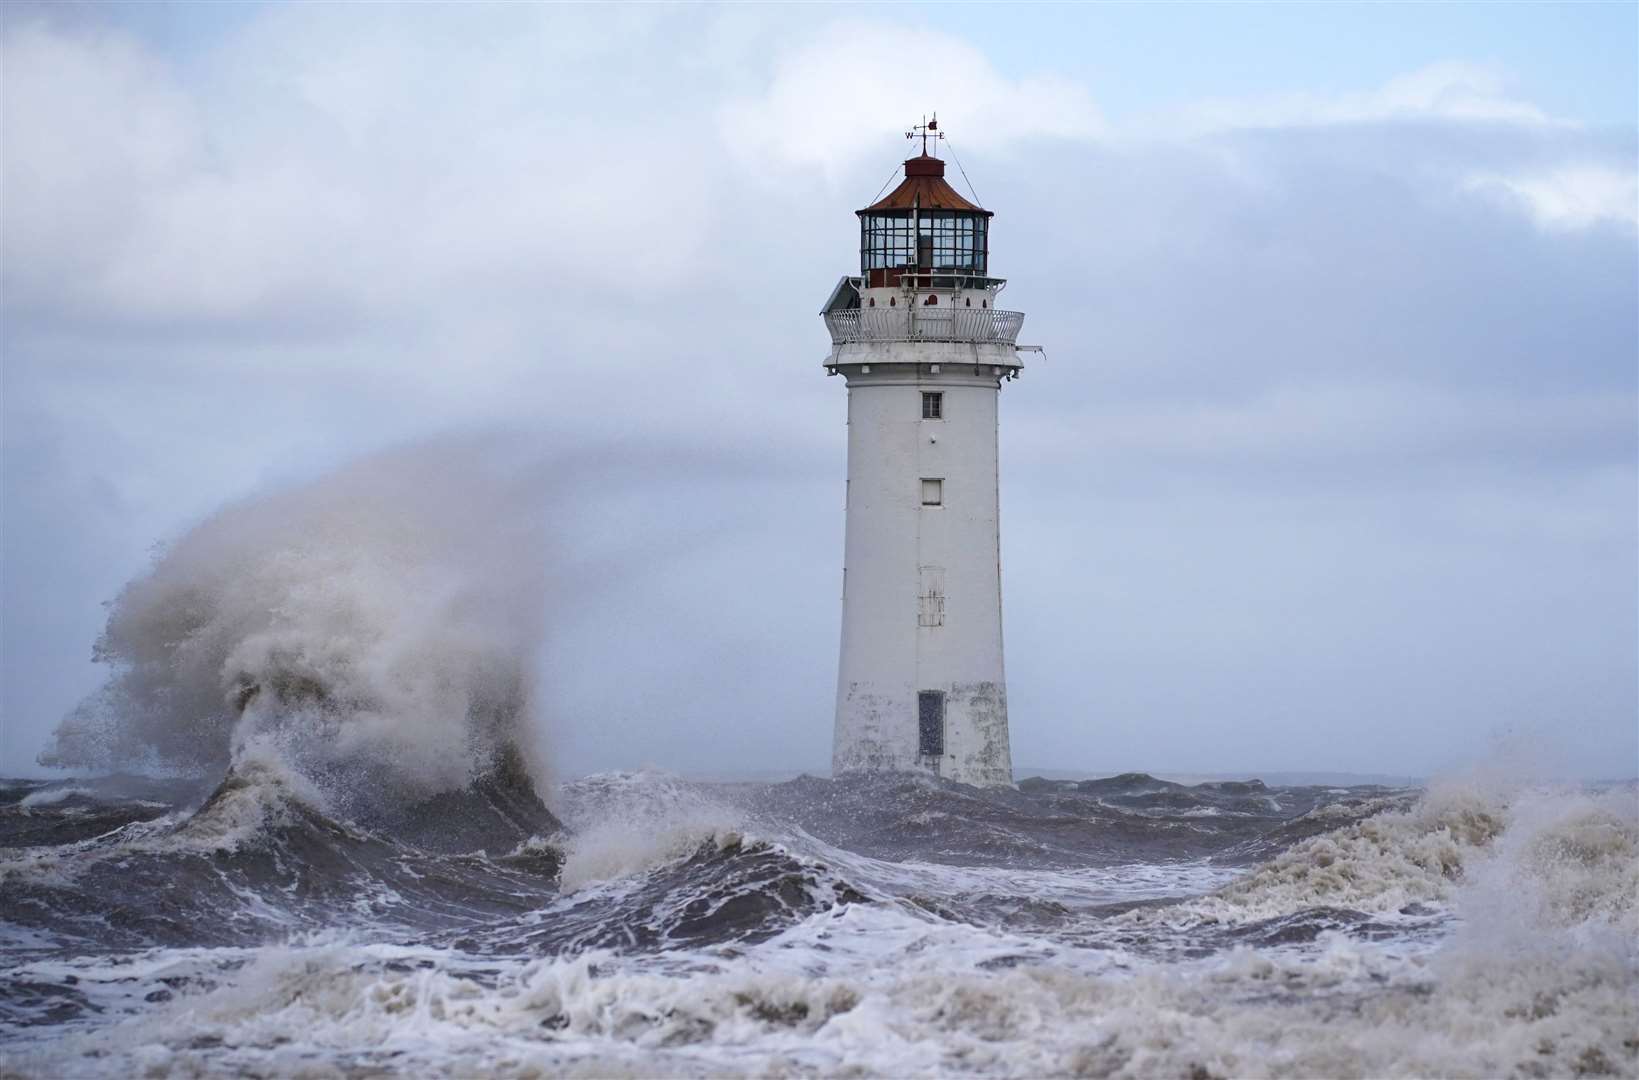 Storm surges were likely to become larger as the sea level rose and storms intensified, experts said (Peter Byrne/PA)